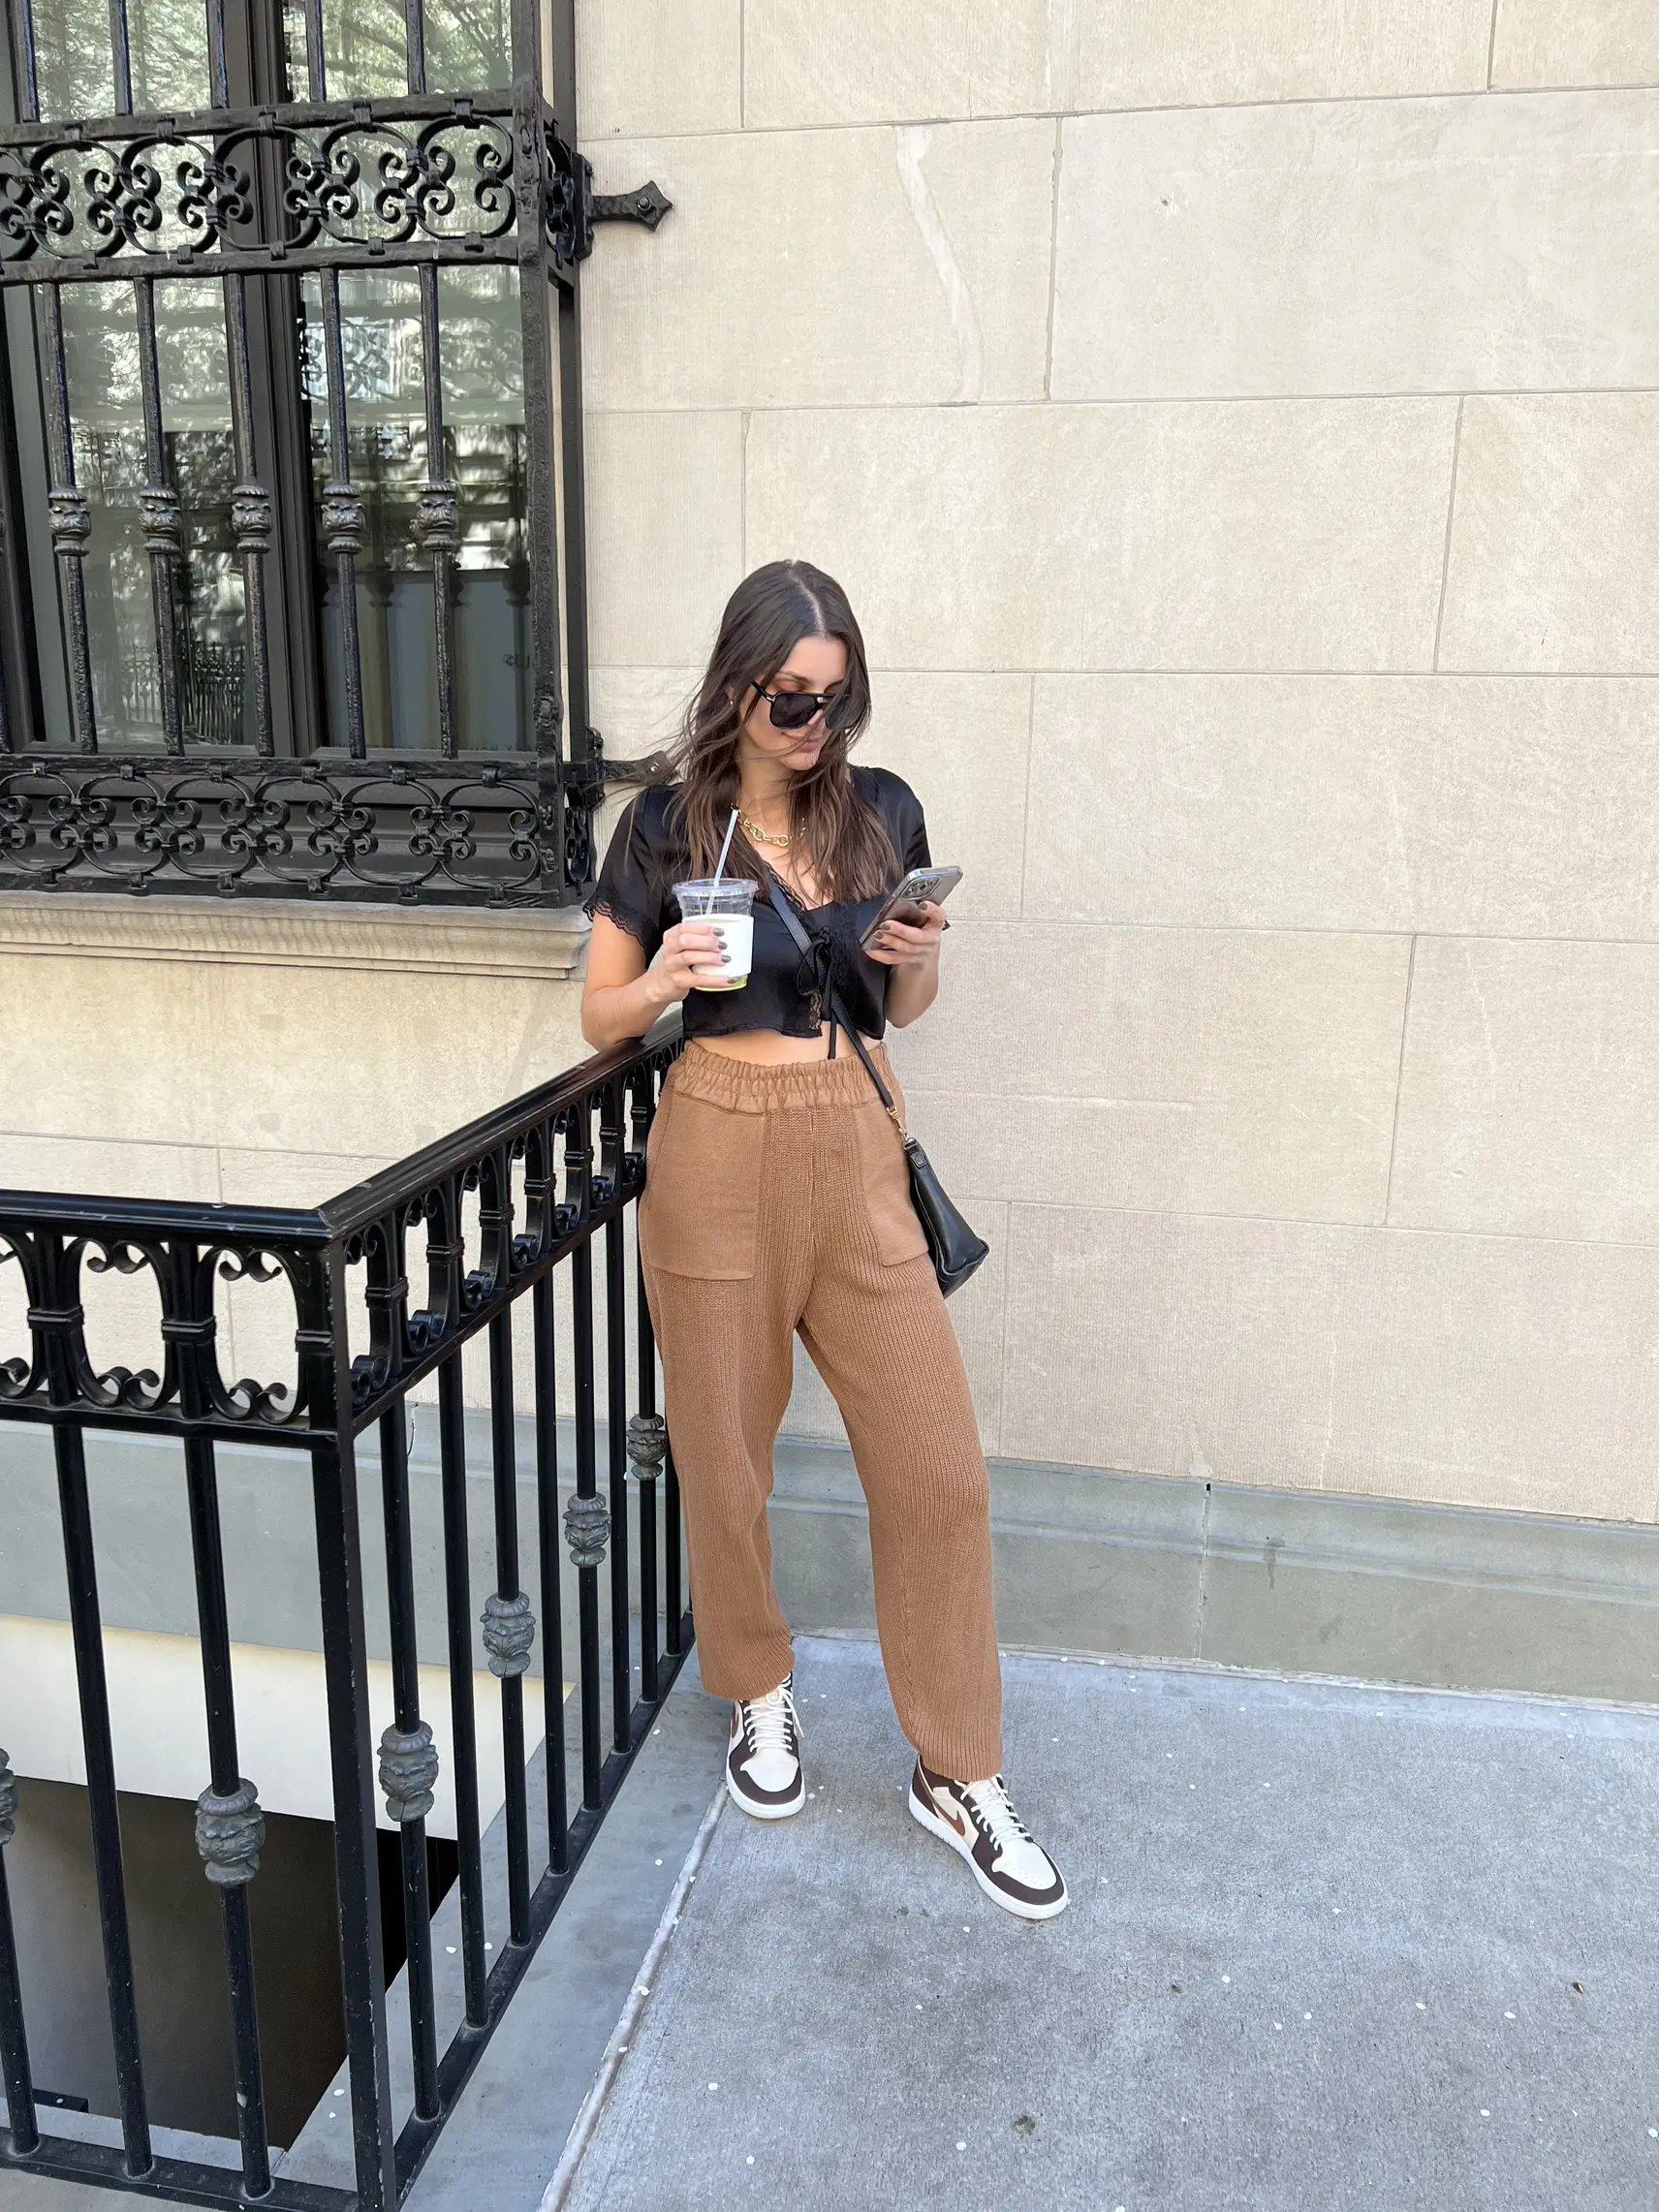 3 outfits I wear on repeat, Gallery posted by megancrean